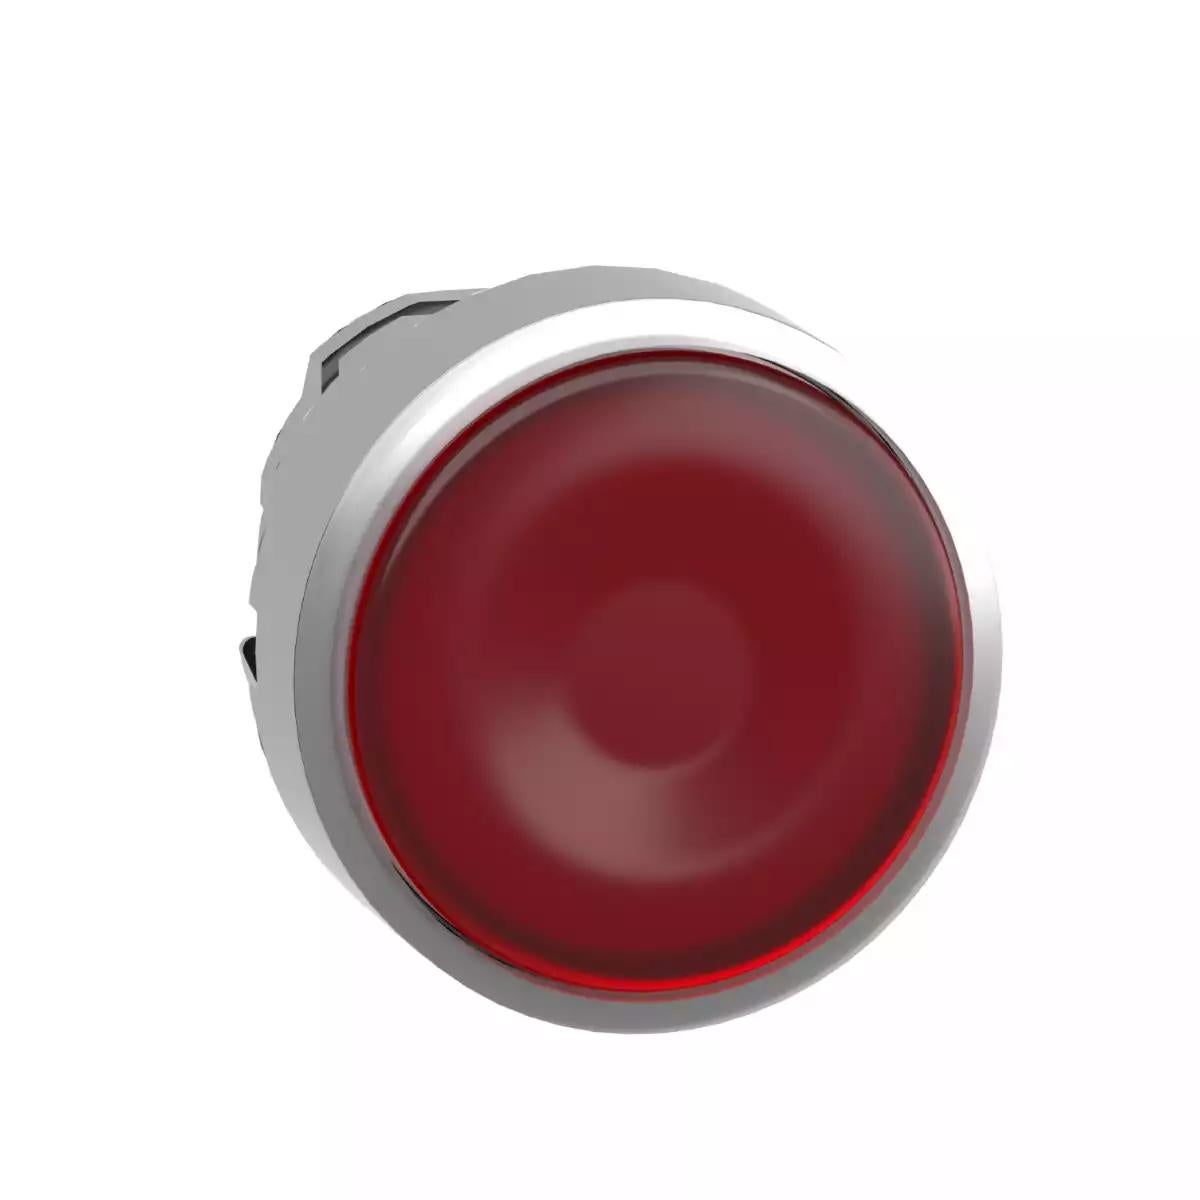 Head for illuminated push button, Harmony XB4, metal, red flush, 22mm, universal LED, spring return, plan lens, unmarked